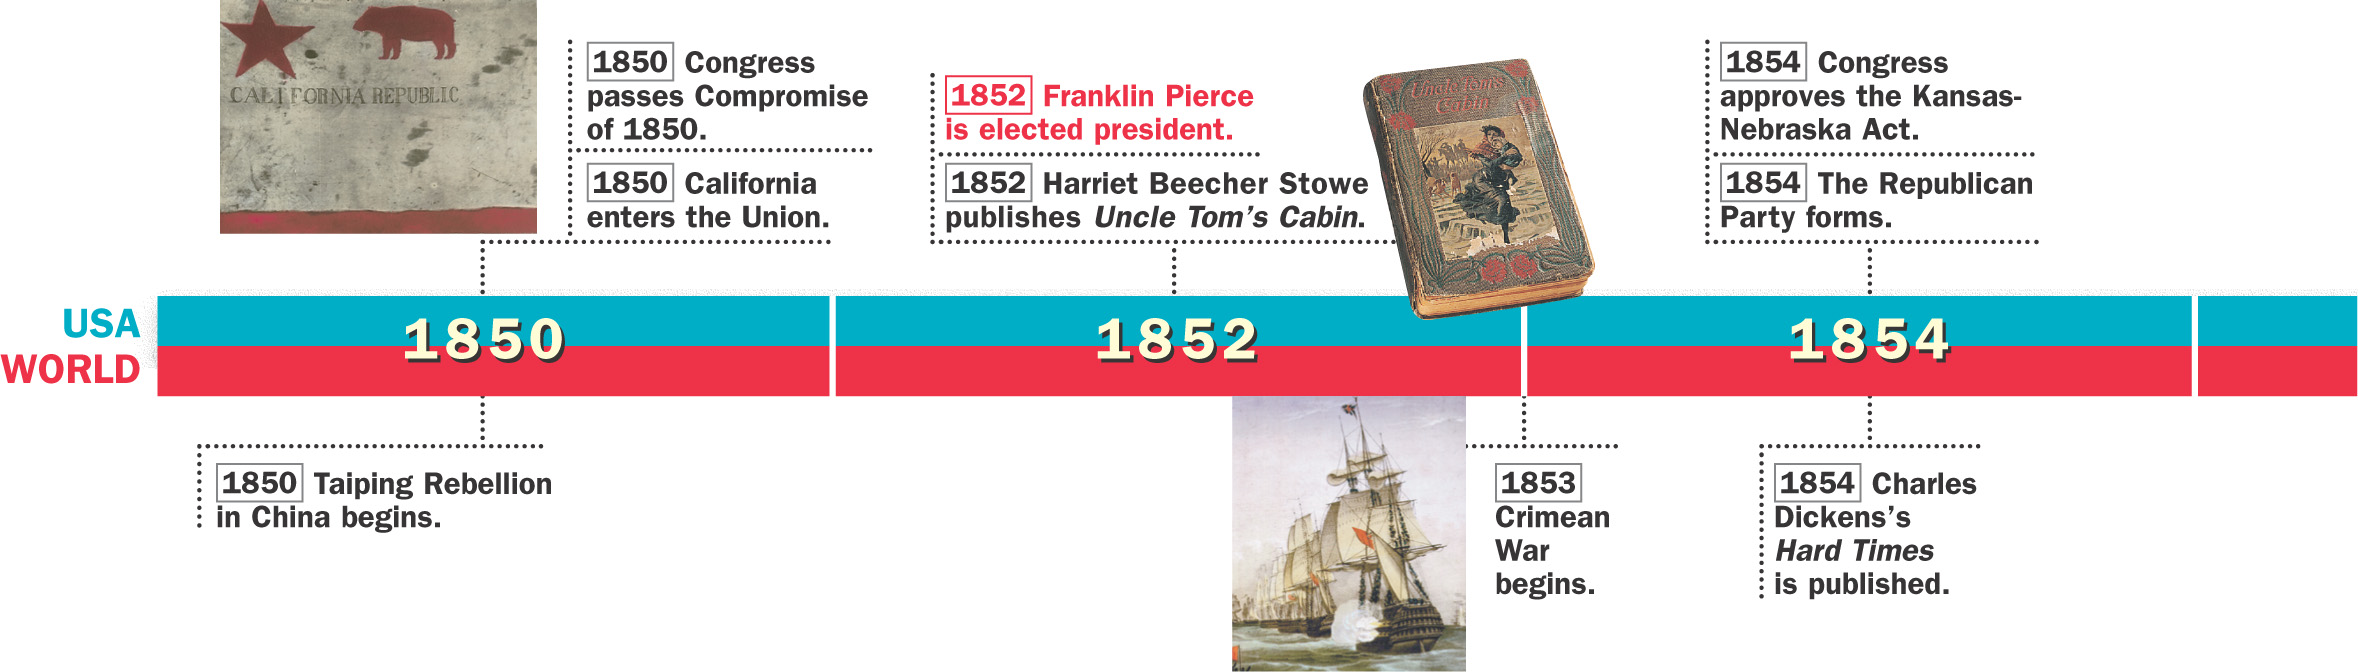 A timeline of historical events from 1850 to 1860 in both the U.S. and the world